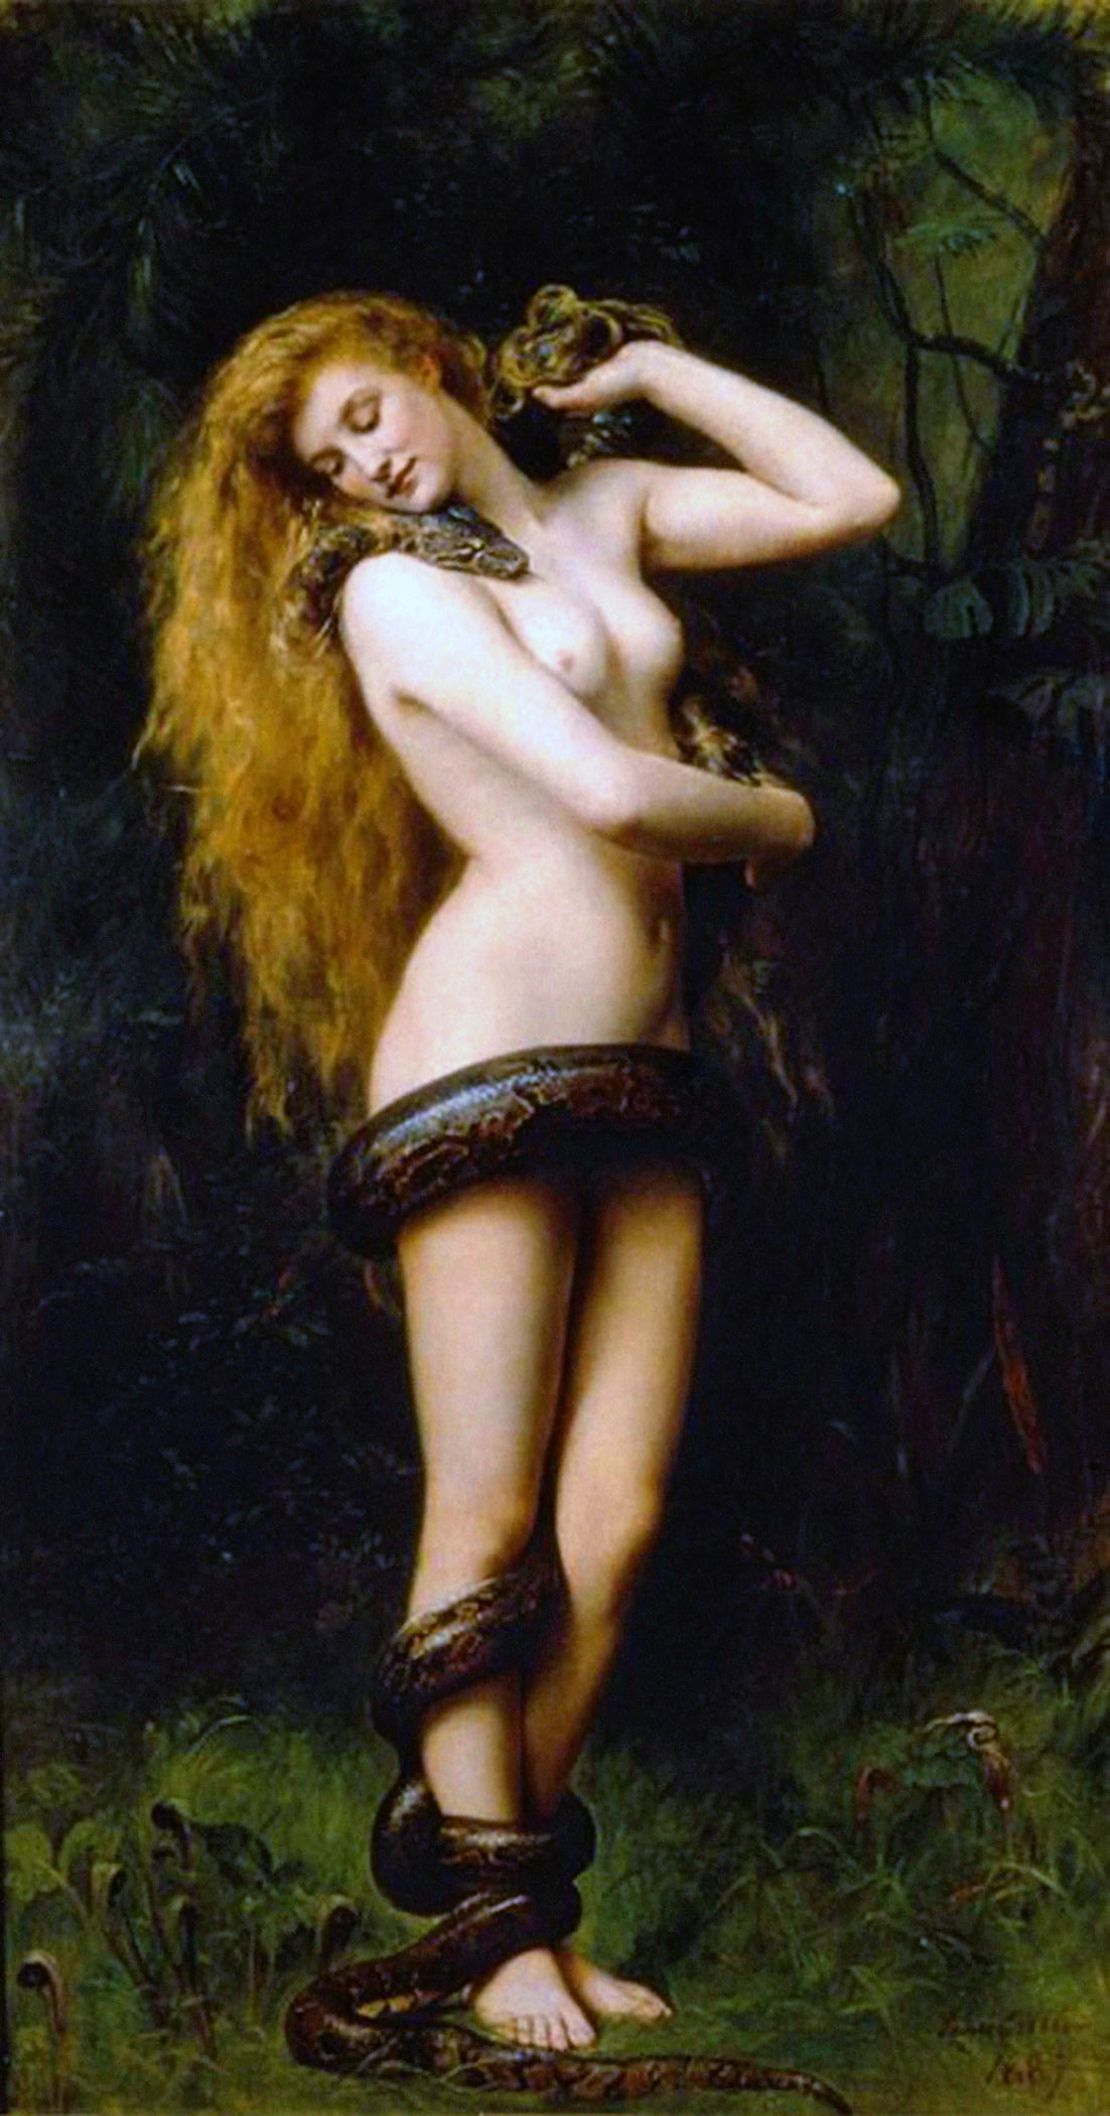 "Lilith" (1887) by John Collier